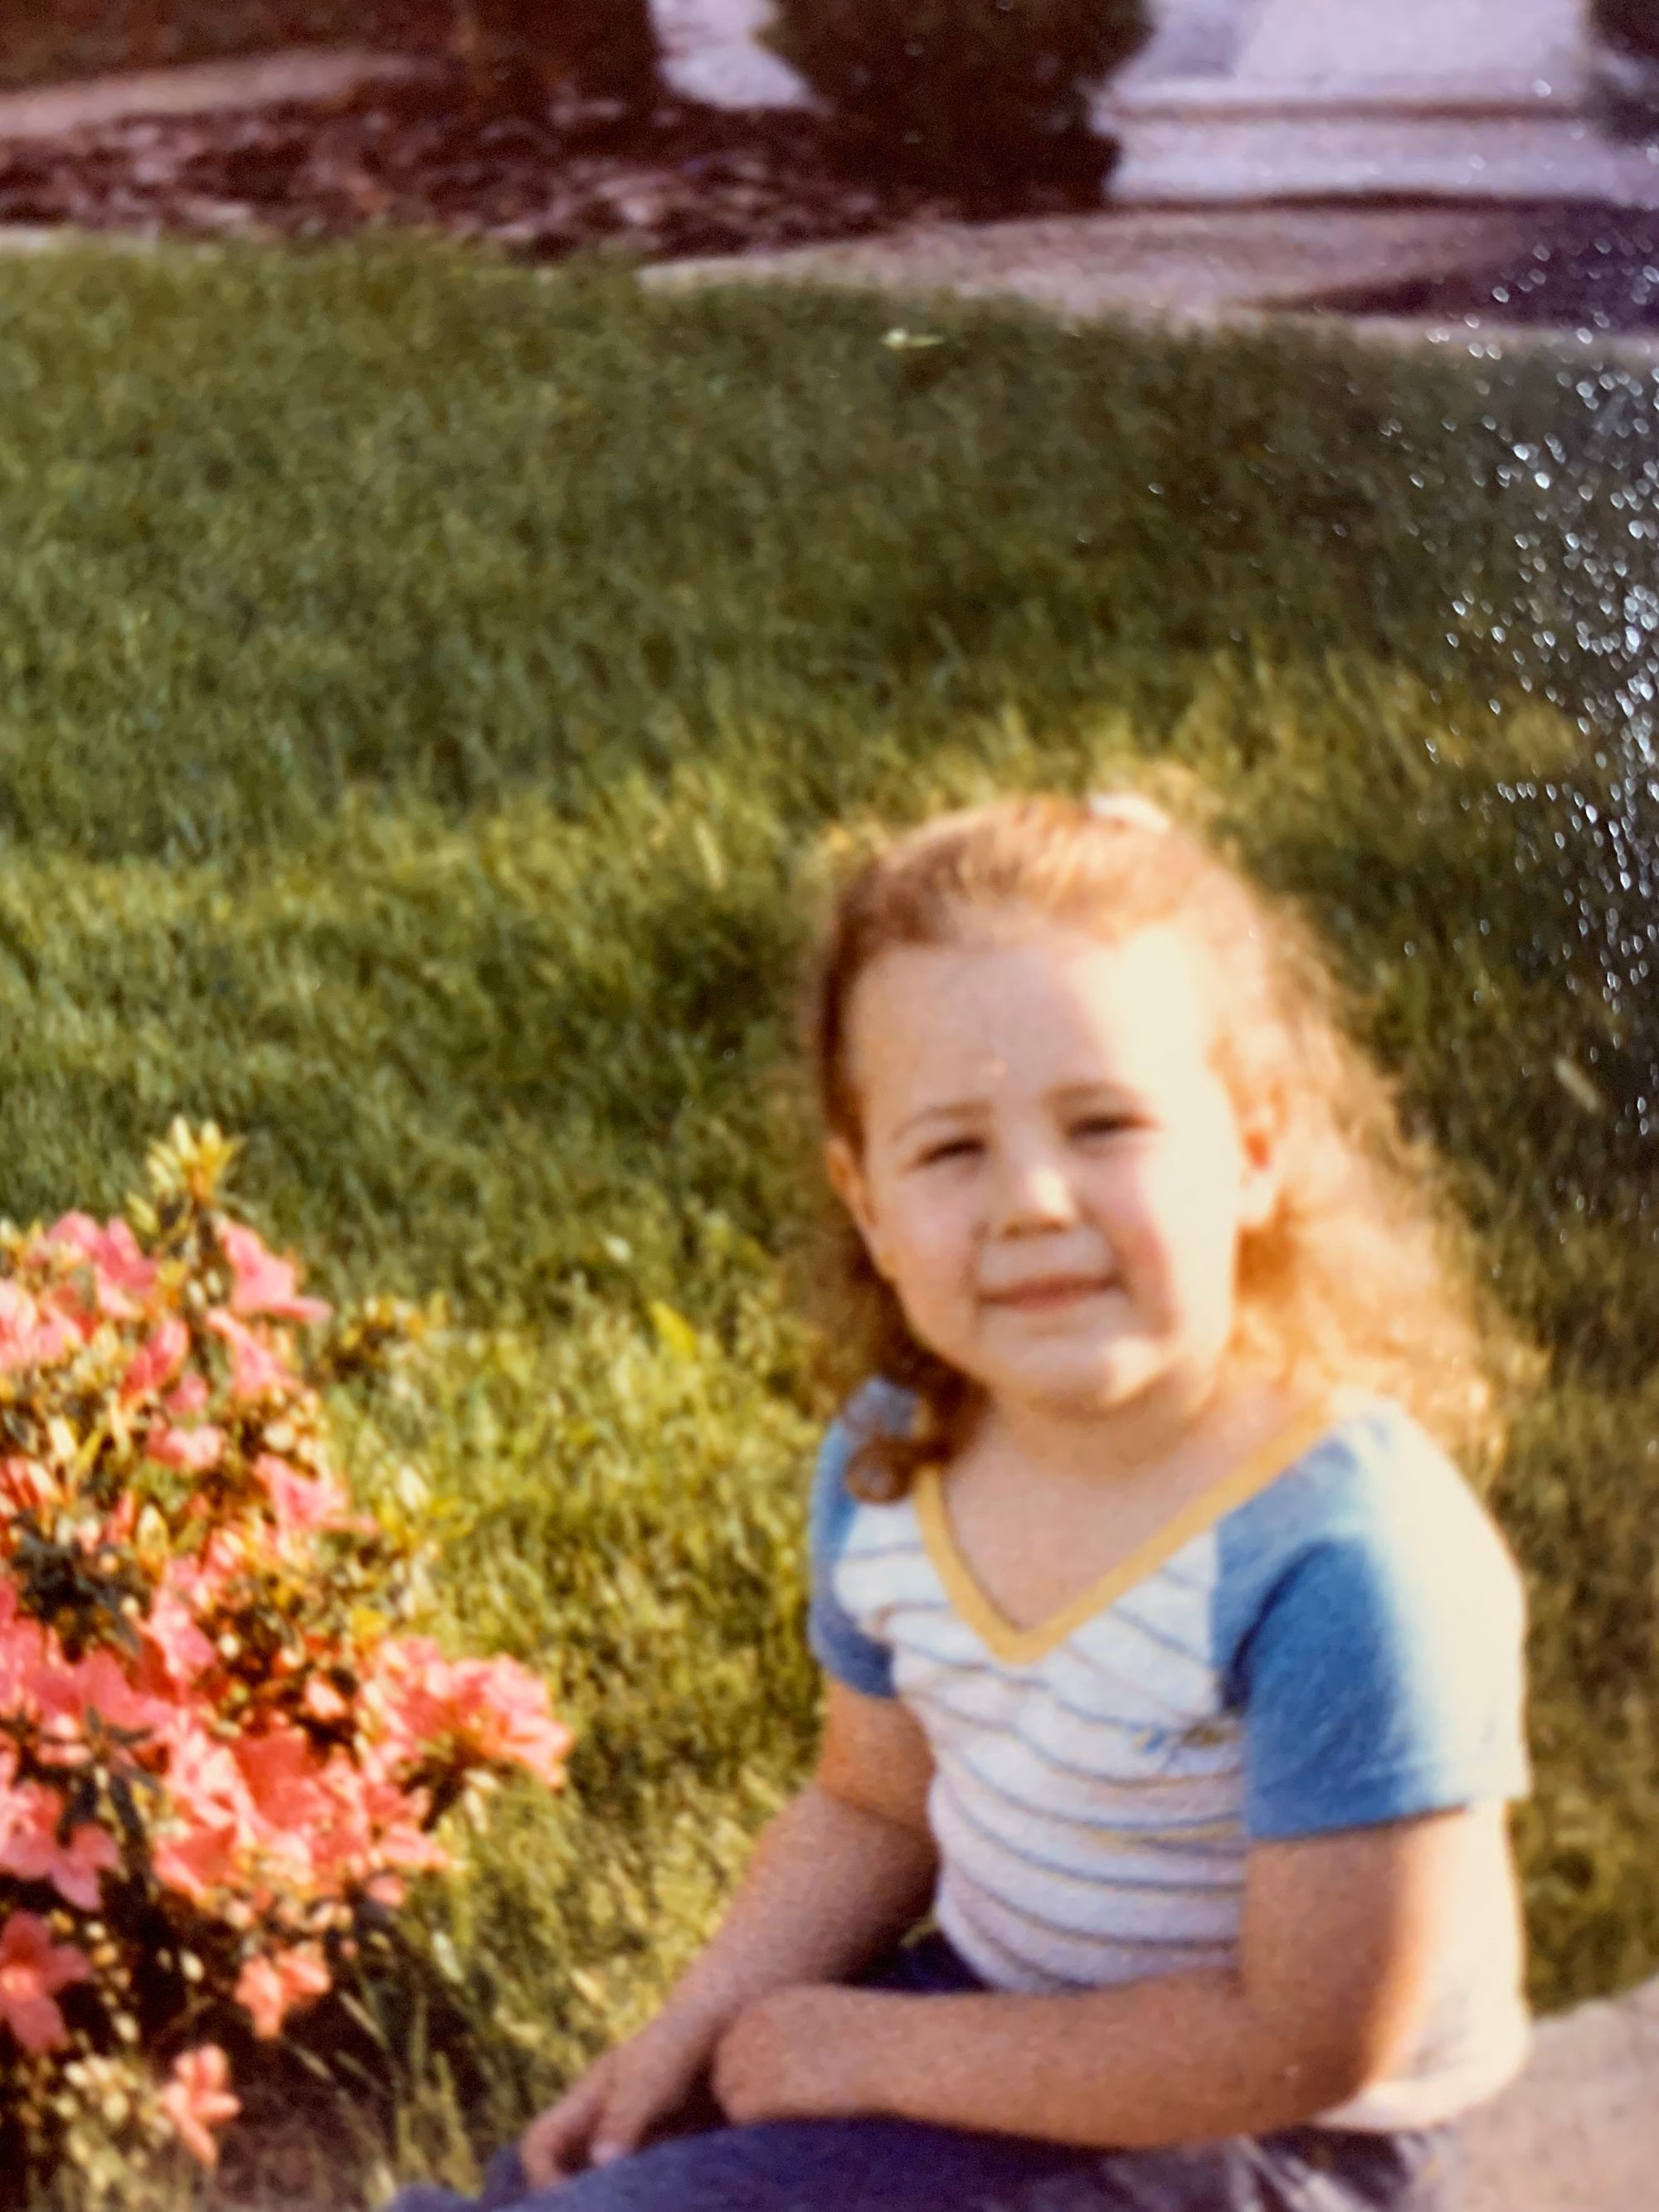 a white brown haired child sits near a pink flowering bush, wearing a blue yellow and white shit and blue pants. zi is smiling in the picture.